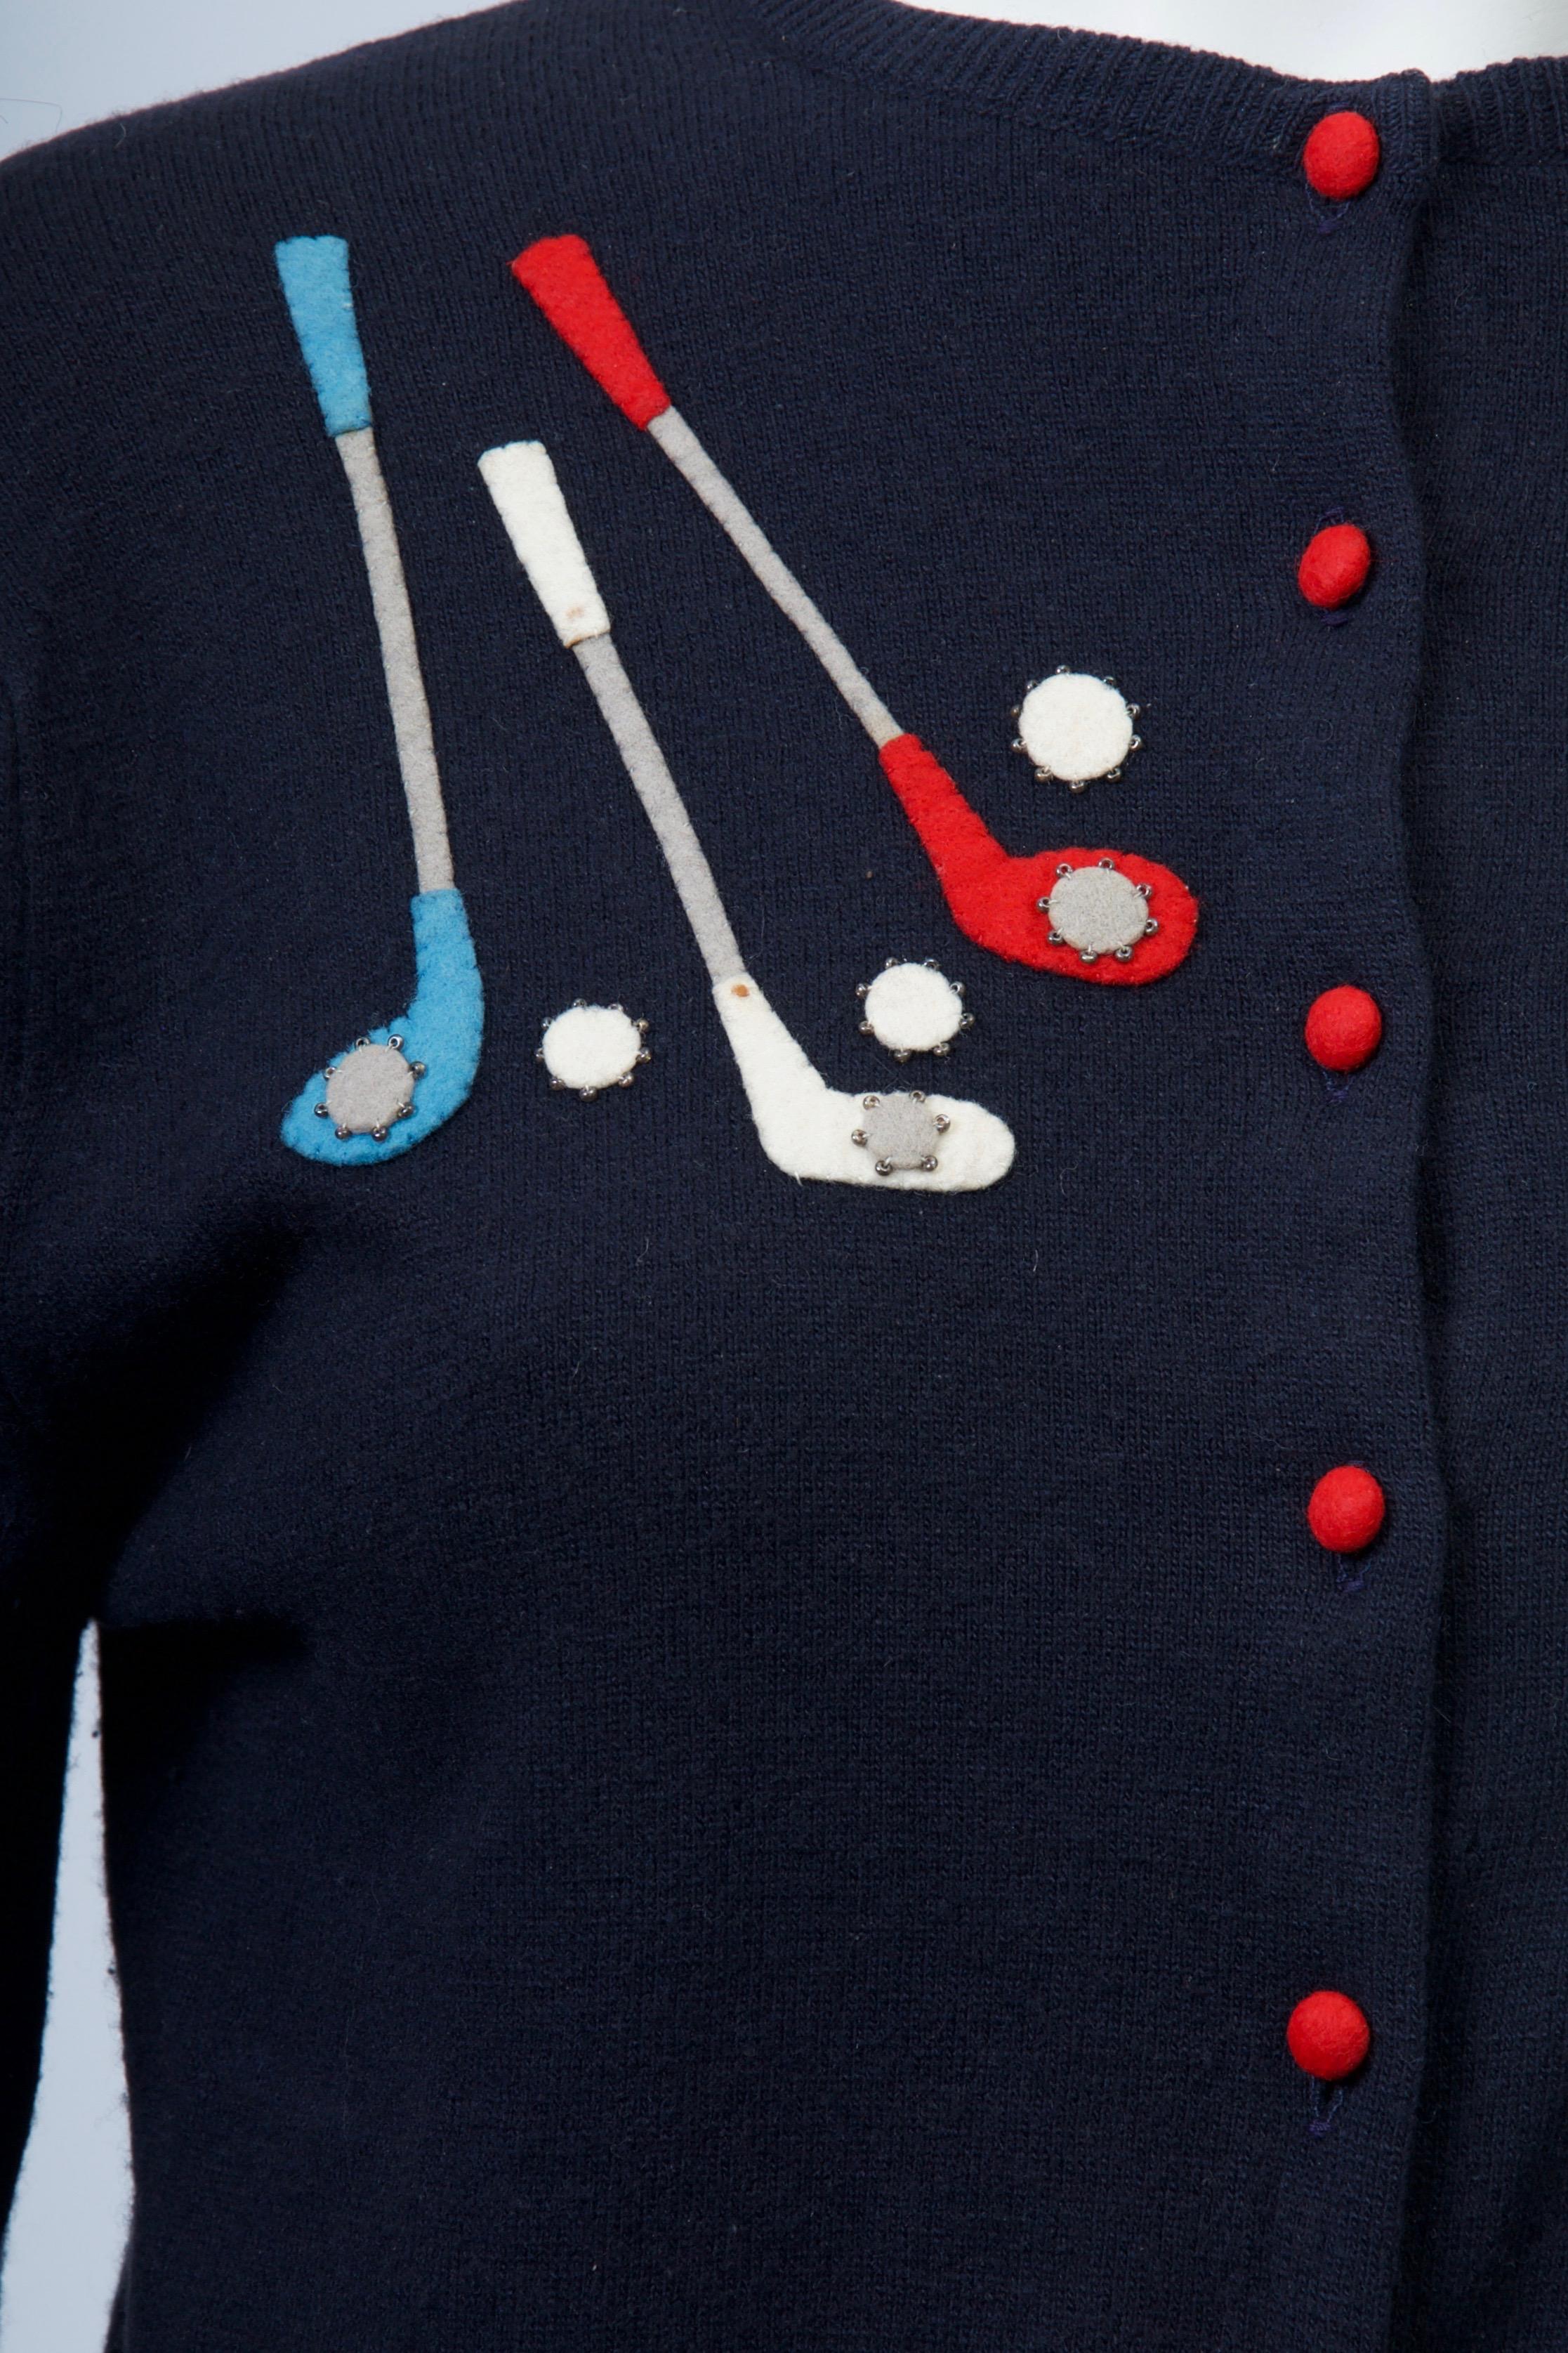 Decorated cardigans are some of the most iconic vintage items from the 1950s and '60s. This example is fashioned of navy cashmere and features felt appliqués in white, blue and red of golf clubs, club covers, and a golf bag. Tiny red buttons stand